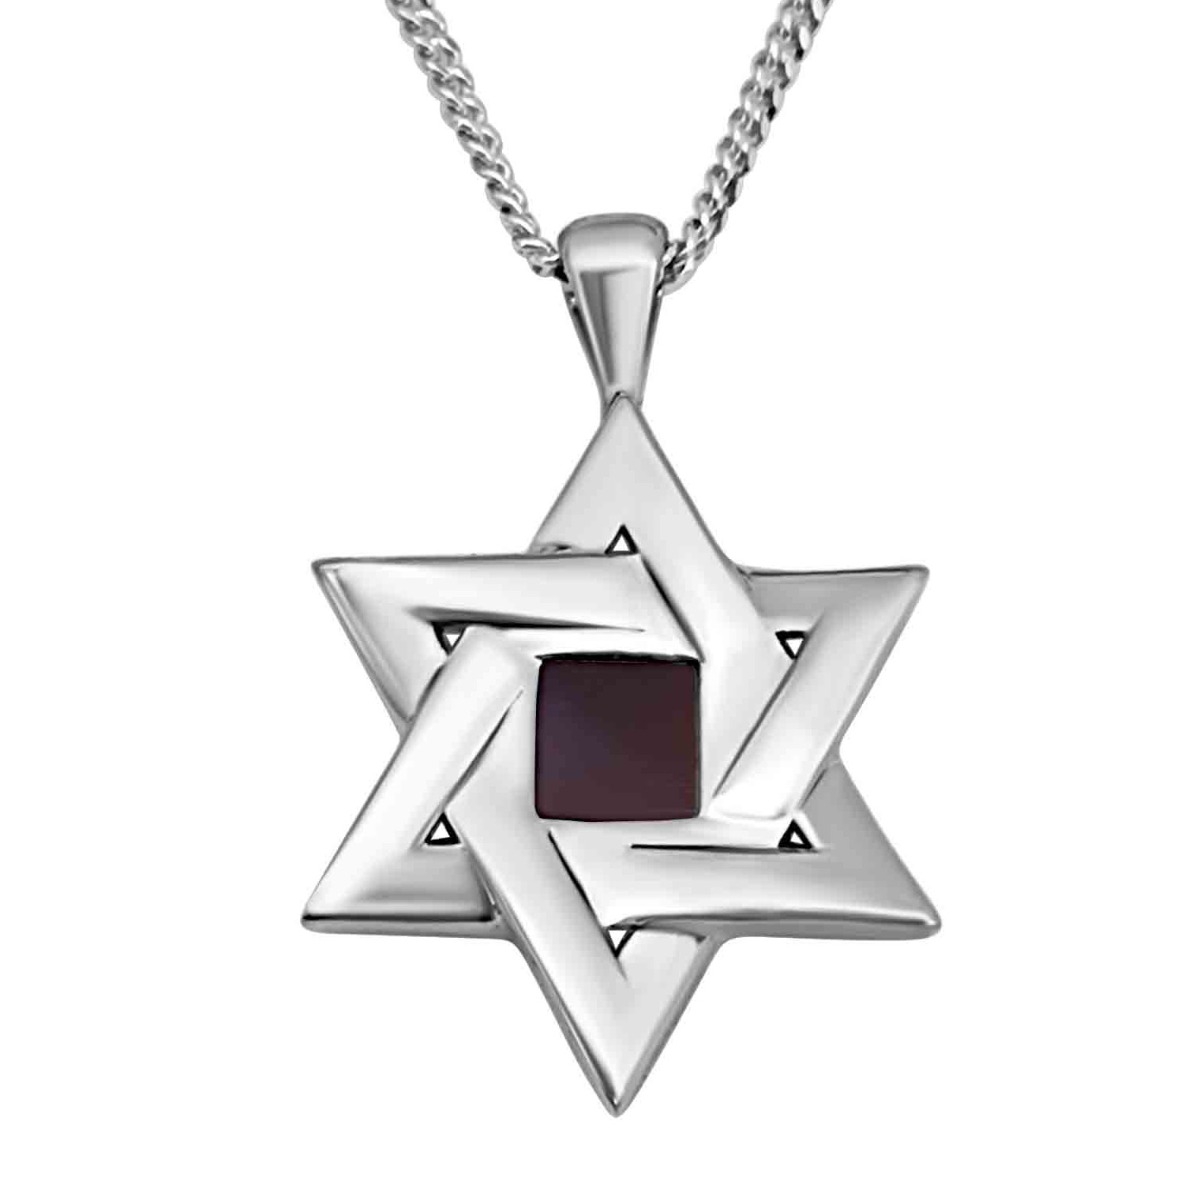 Grand Star of David Pendant with Micro-Inscribed Bible Chip - Silver or 14K Gold - 1